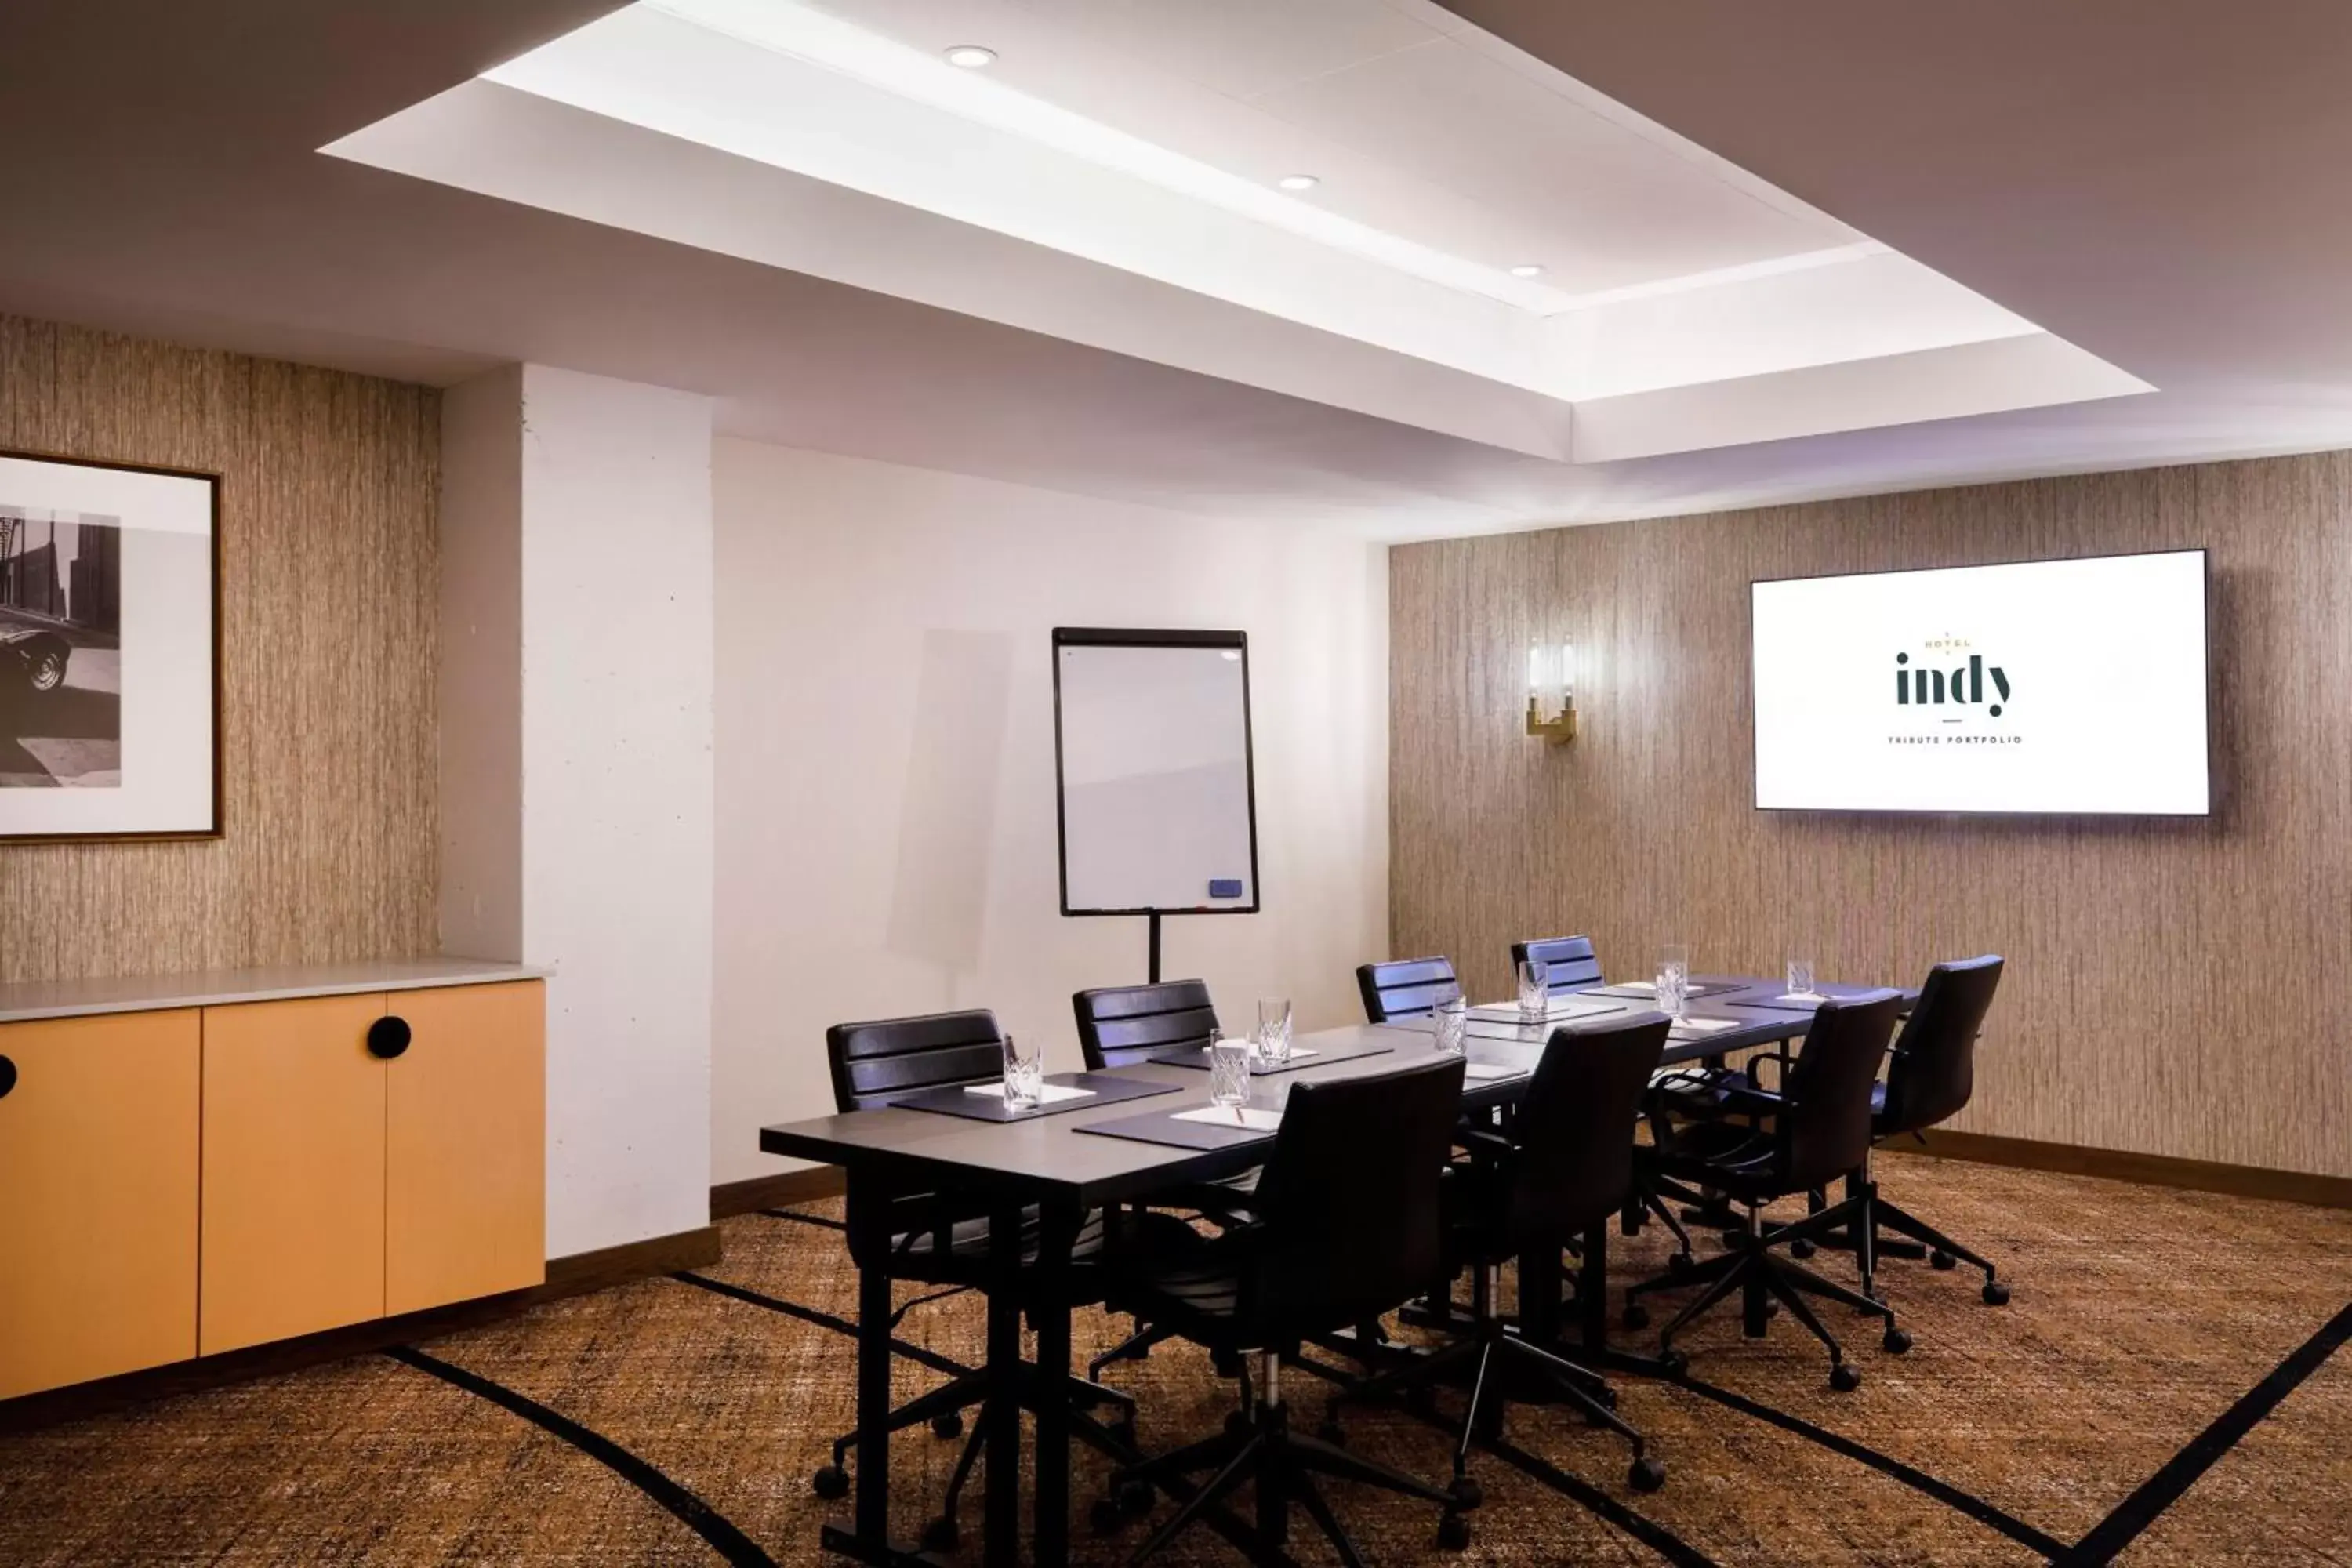 Meeting/conference room in Hotel Indy, Indianapolis, a Tribute Portfolio Hotel